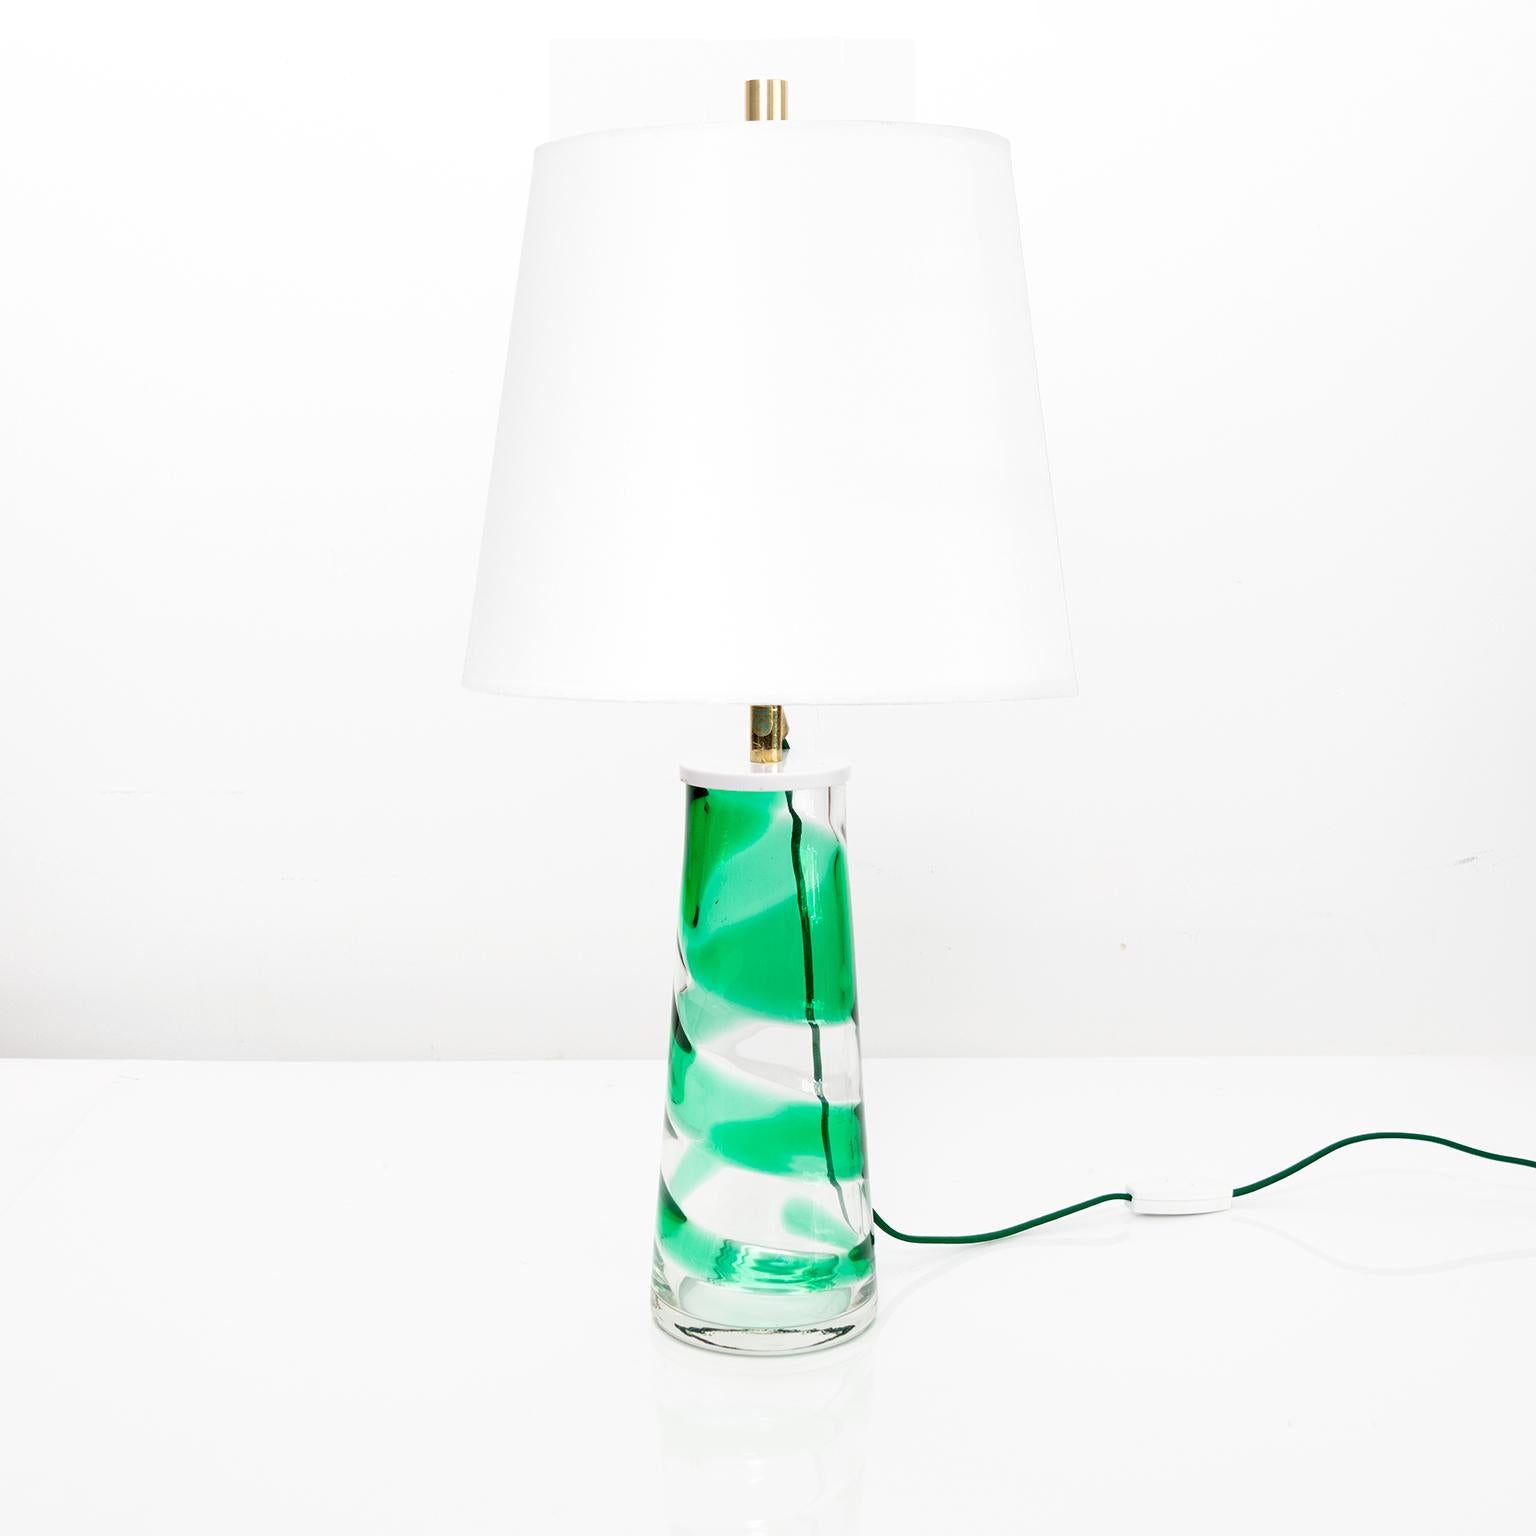 Philips midcentury clear glass table lamp with spiral band of green glass. Newly re-wired with a single 3-way socket in lightly patinated harp and finial. Shade not included.

Measures: Total height: 22.25” body height: 10.5” diameter: 4.5.